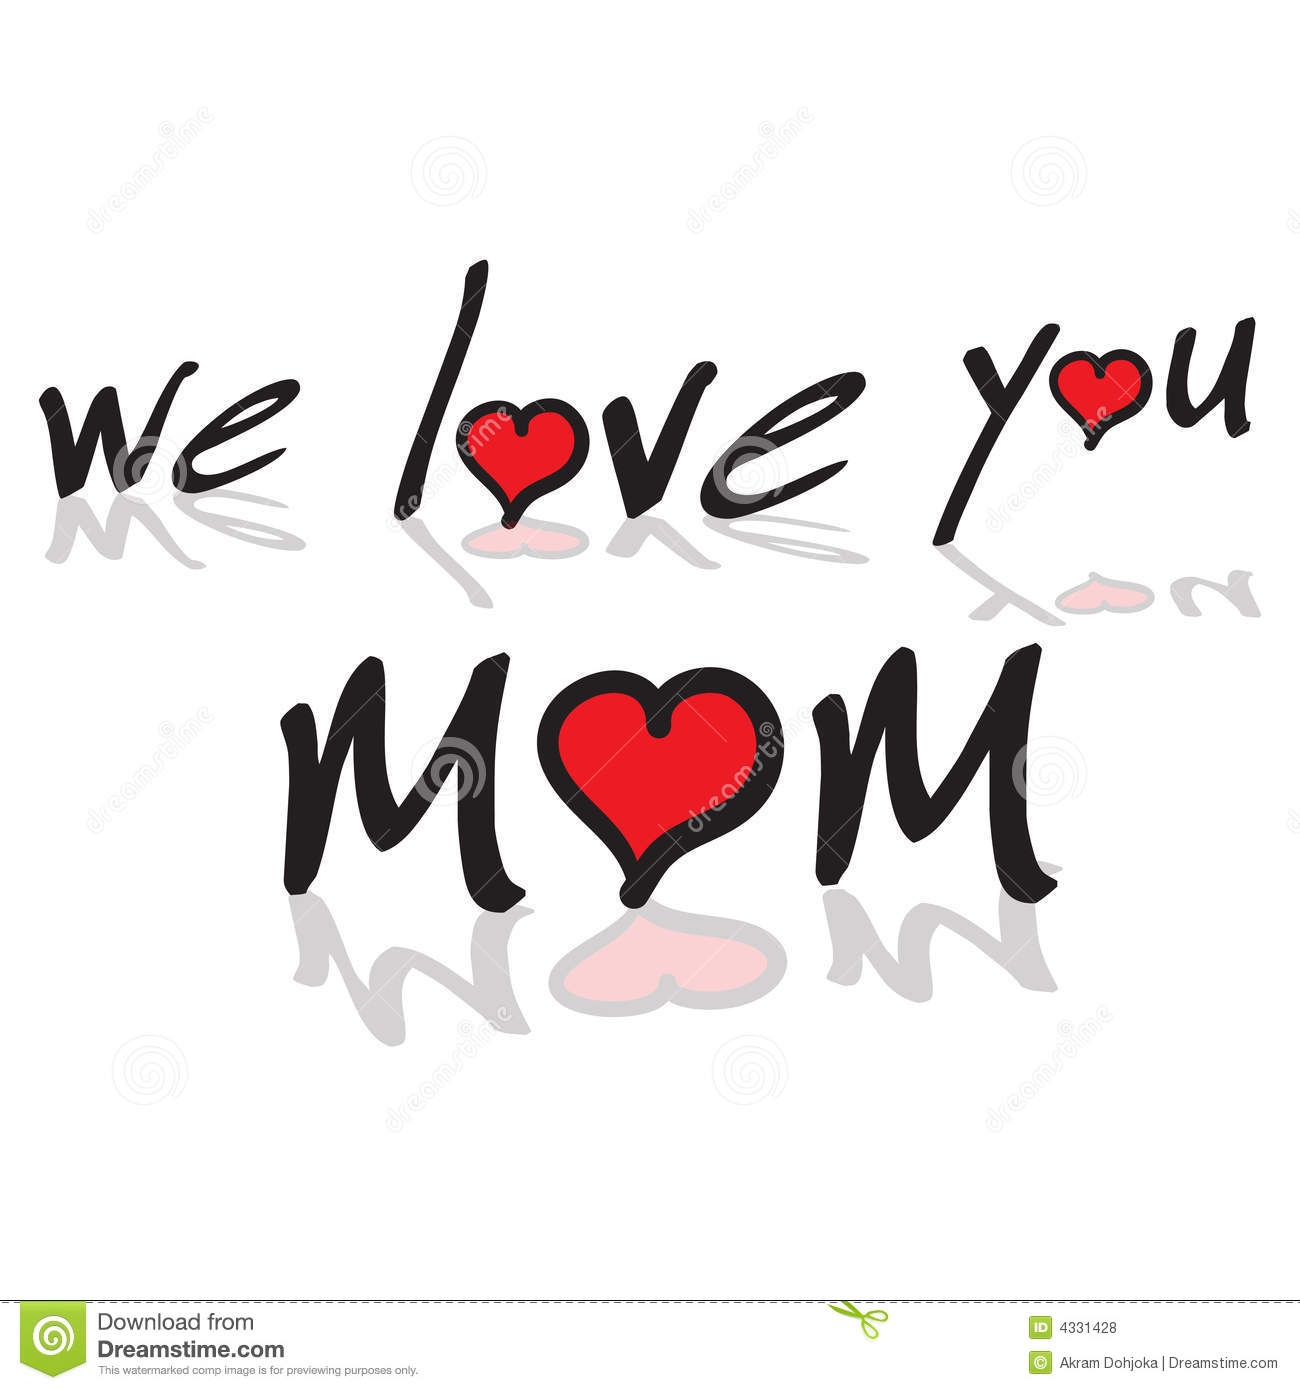 We love you momma clipart.